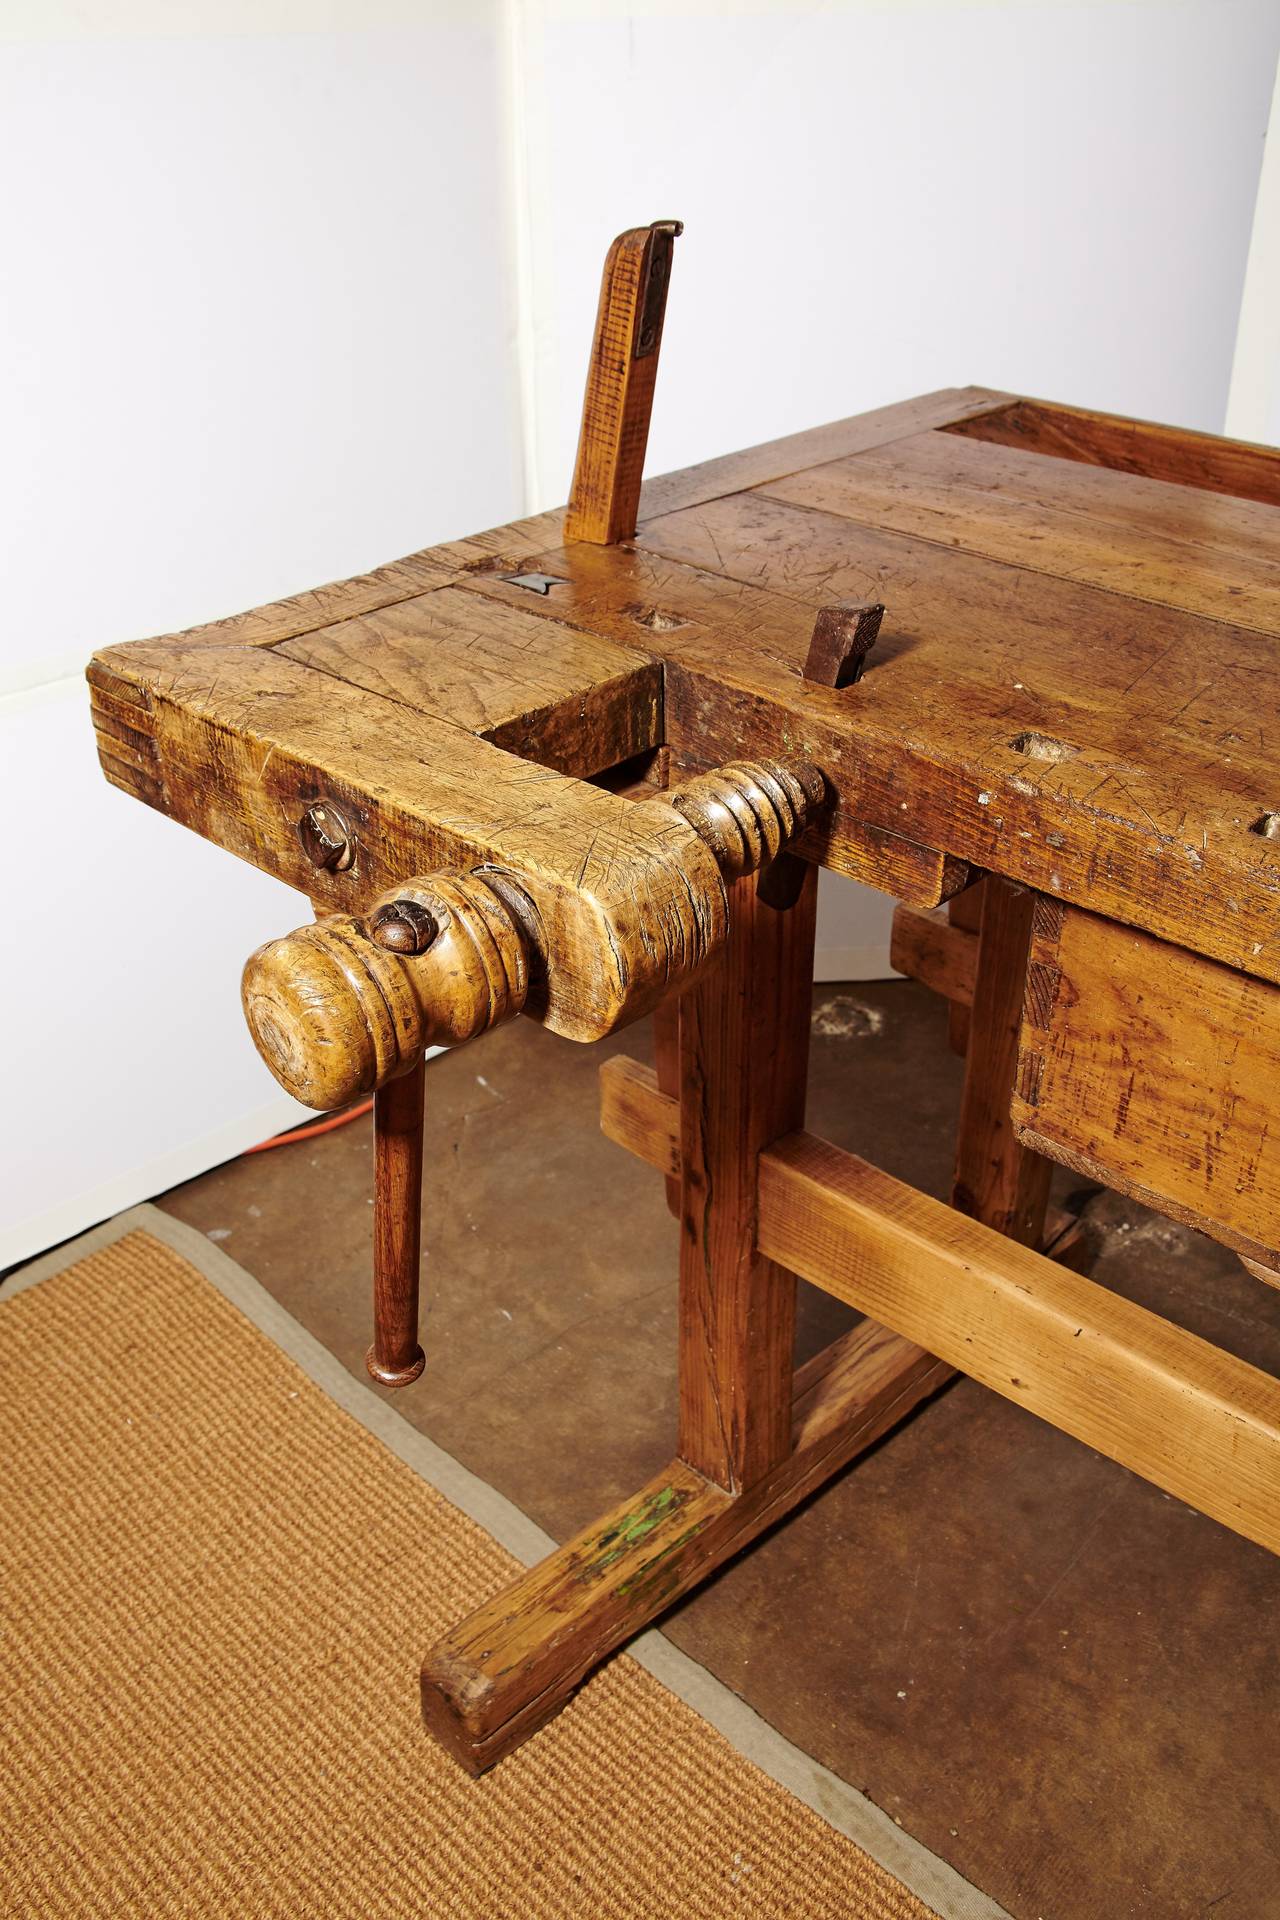 Original working wooden vises on European carpenter's pine and mixed hardwood workbench, circa 1900. Trestle base is held with stretcher/mortice wedge. Recessed tray in back. Dovetailed joinery on the front drawer as well as the corners of the